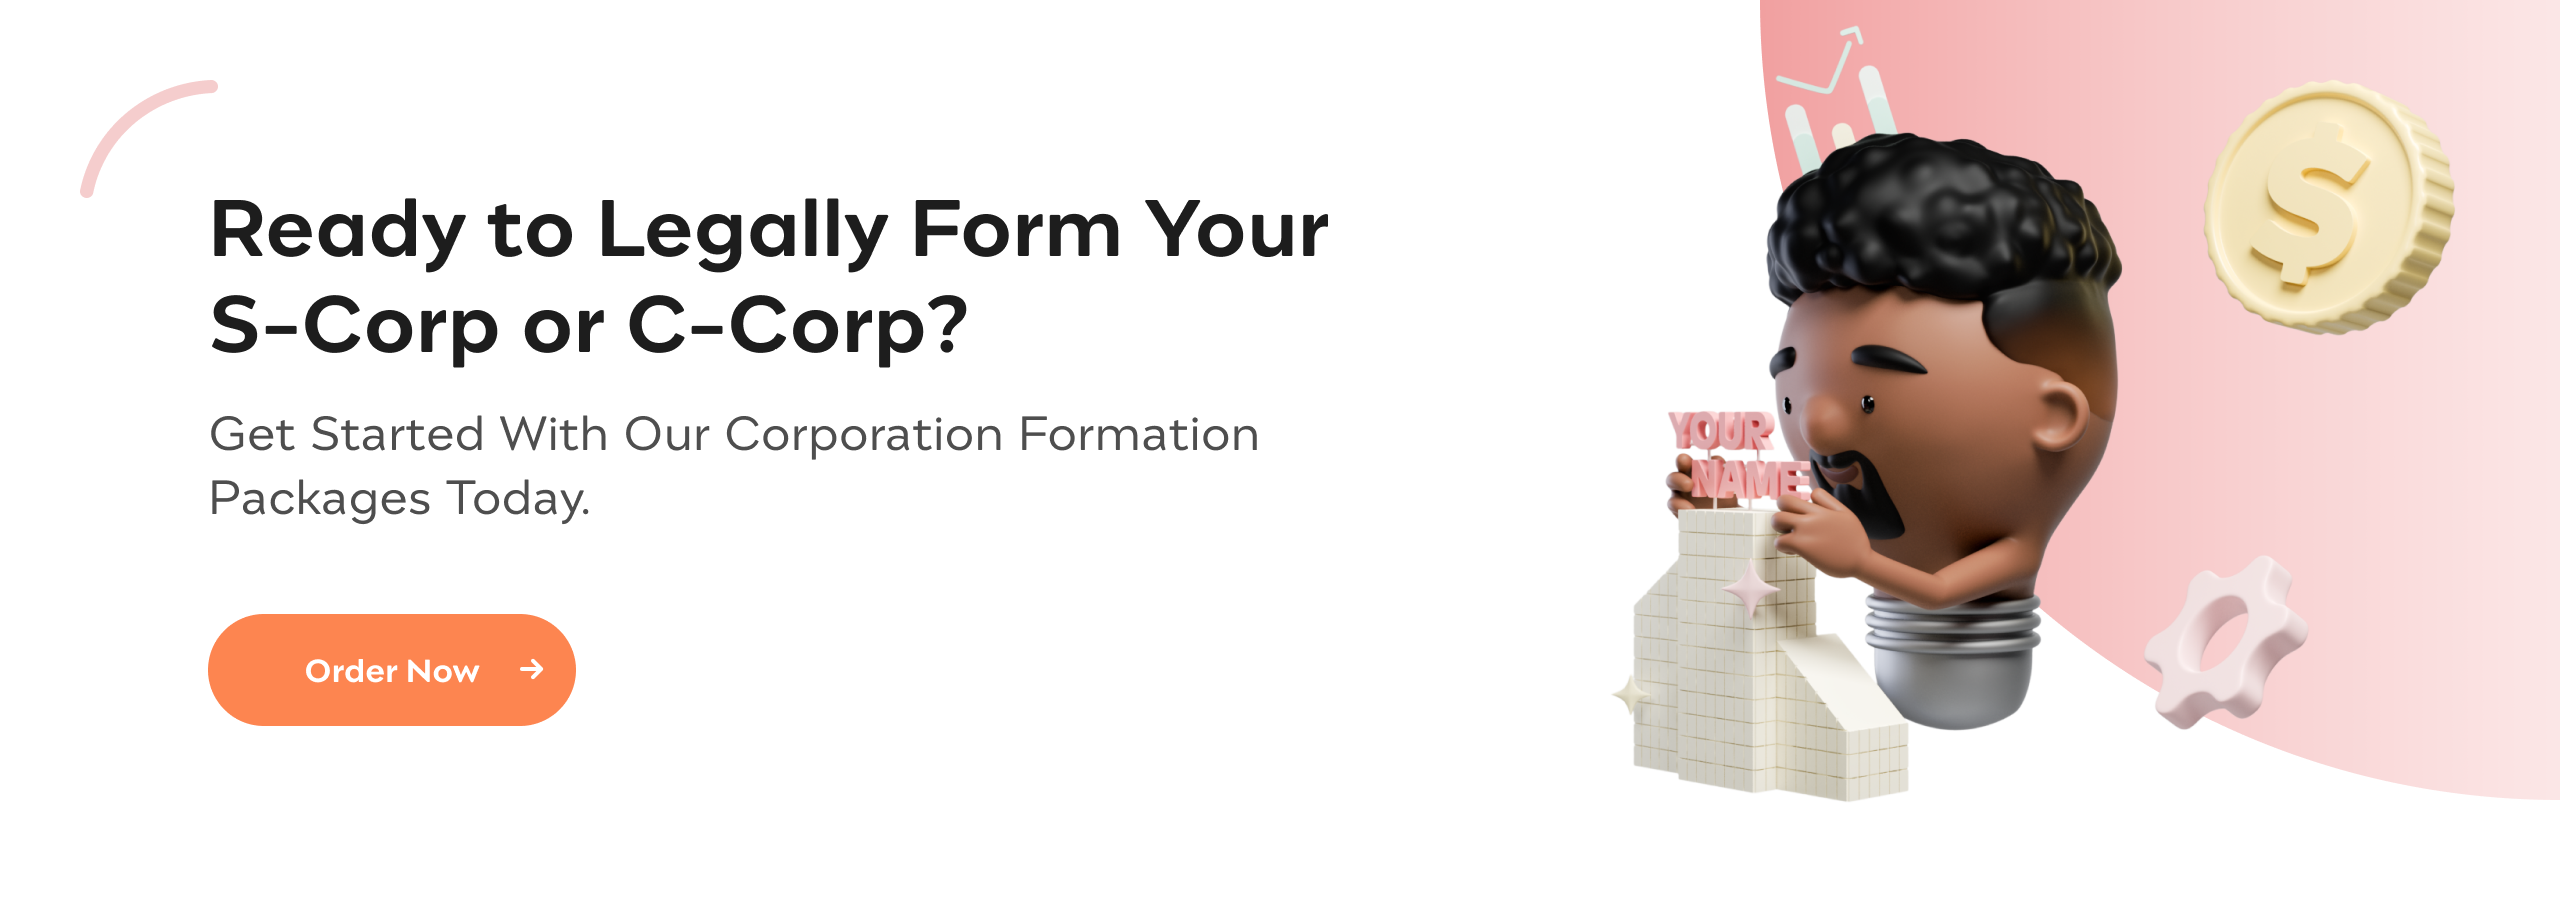 Ready to Legally Form Your S-Corp or C-Corp? Get Started with Our Corporation Formation Packages Today.